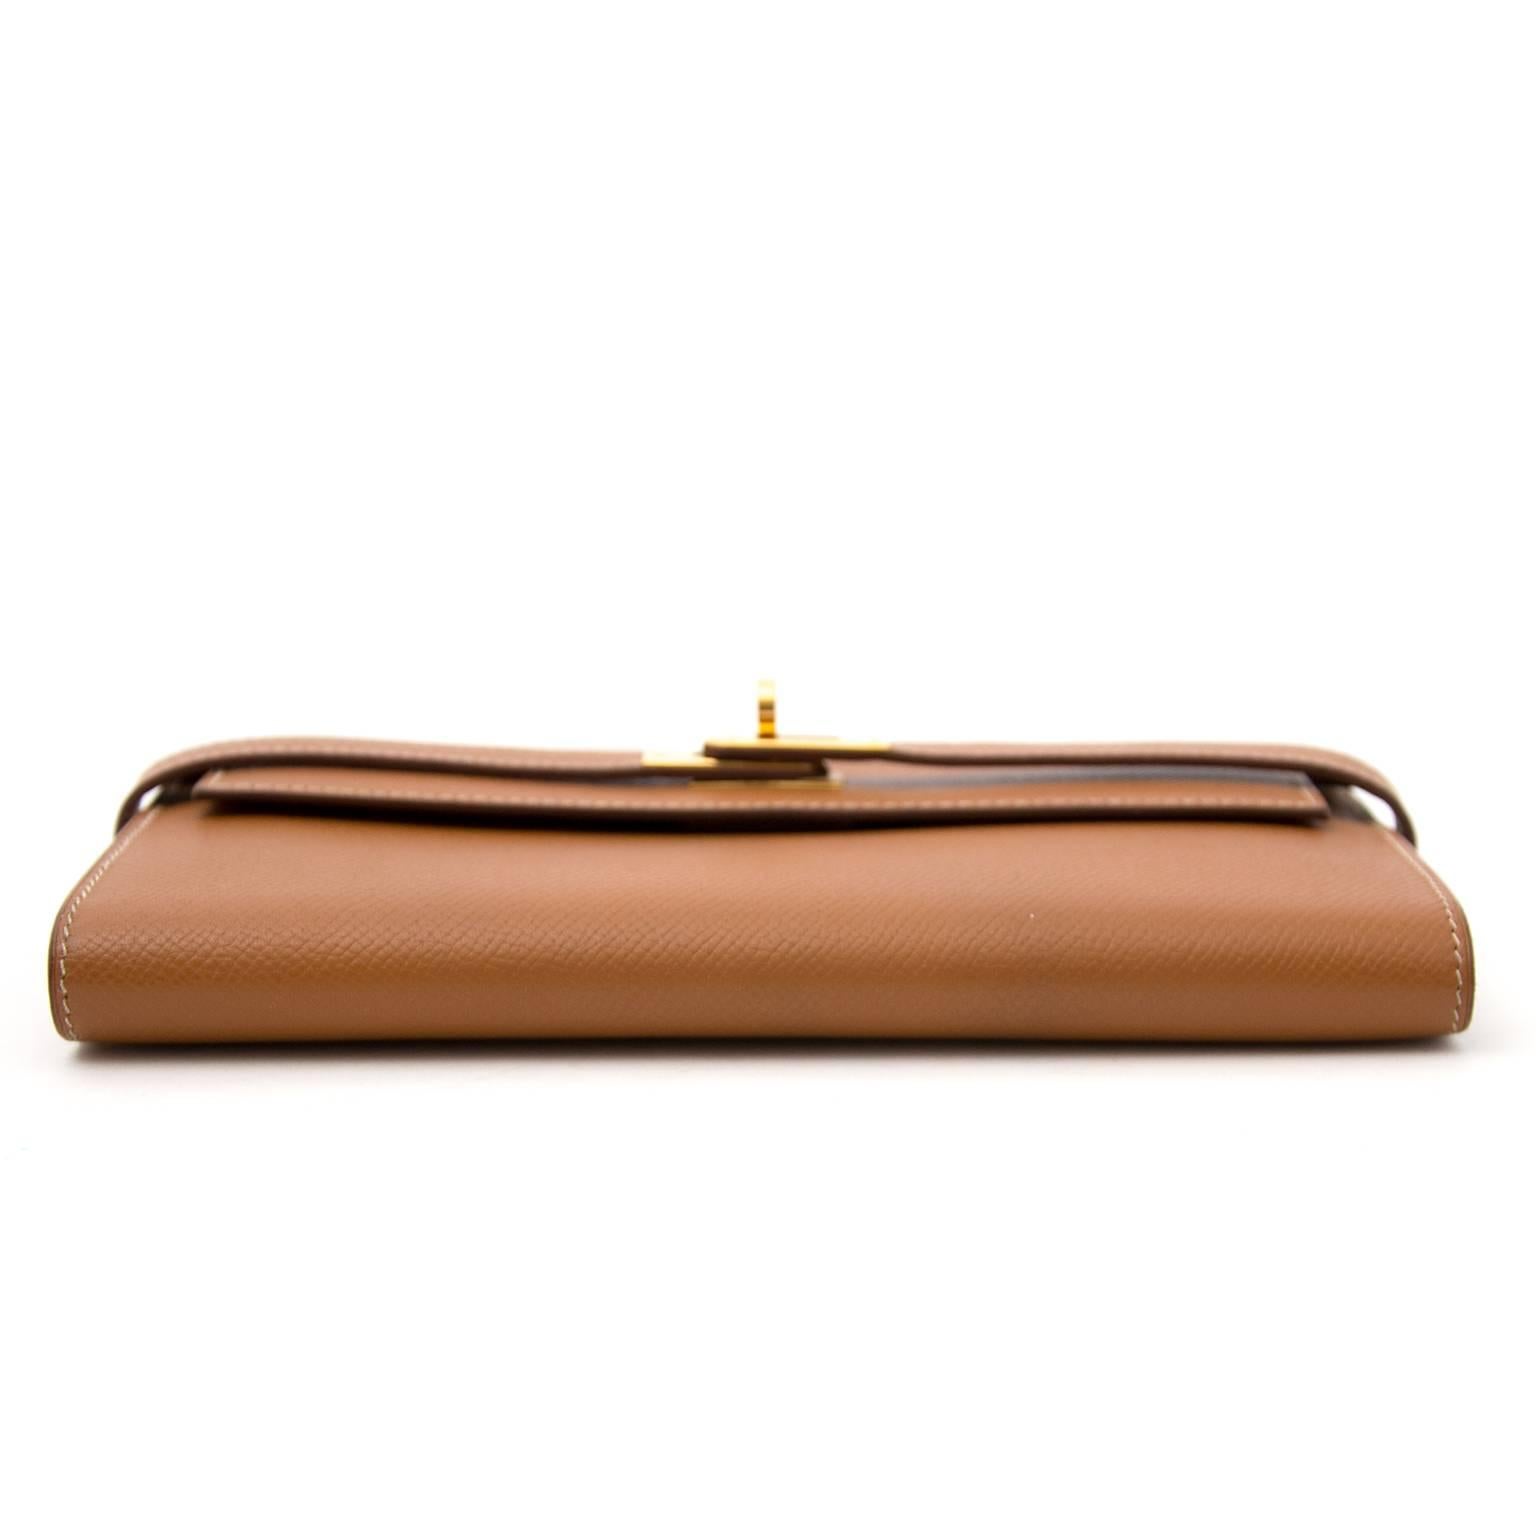 Very Good Preloved condition

 Hermes Gold Epsom Kelly Wallet

This beautifil Hermes Kelly wallet comes in epsom leather in the iconic Hermes Gold leather.
You can recognize the elements of the Kelly on the shape, the impeccable leather and of